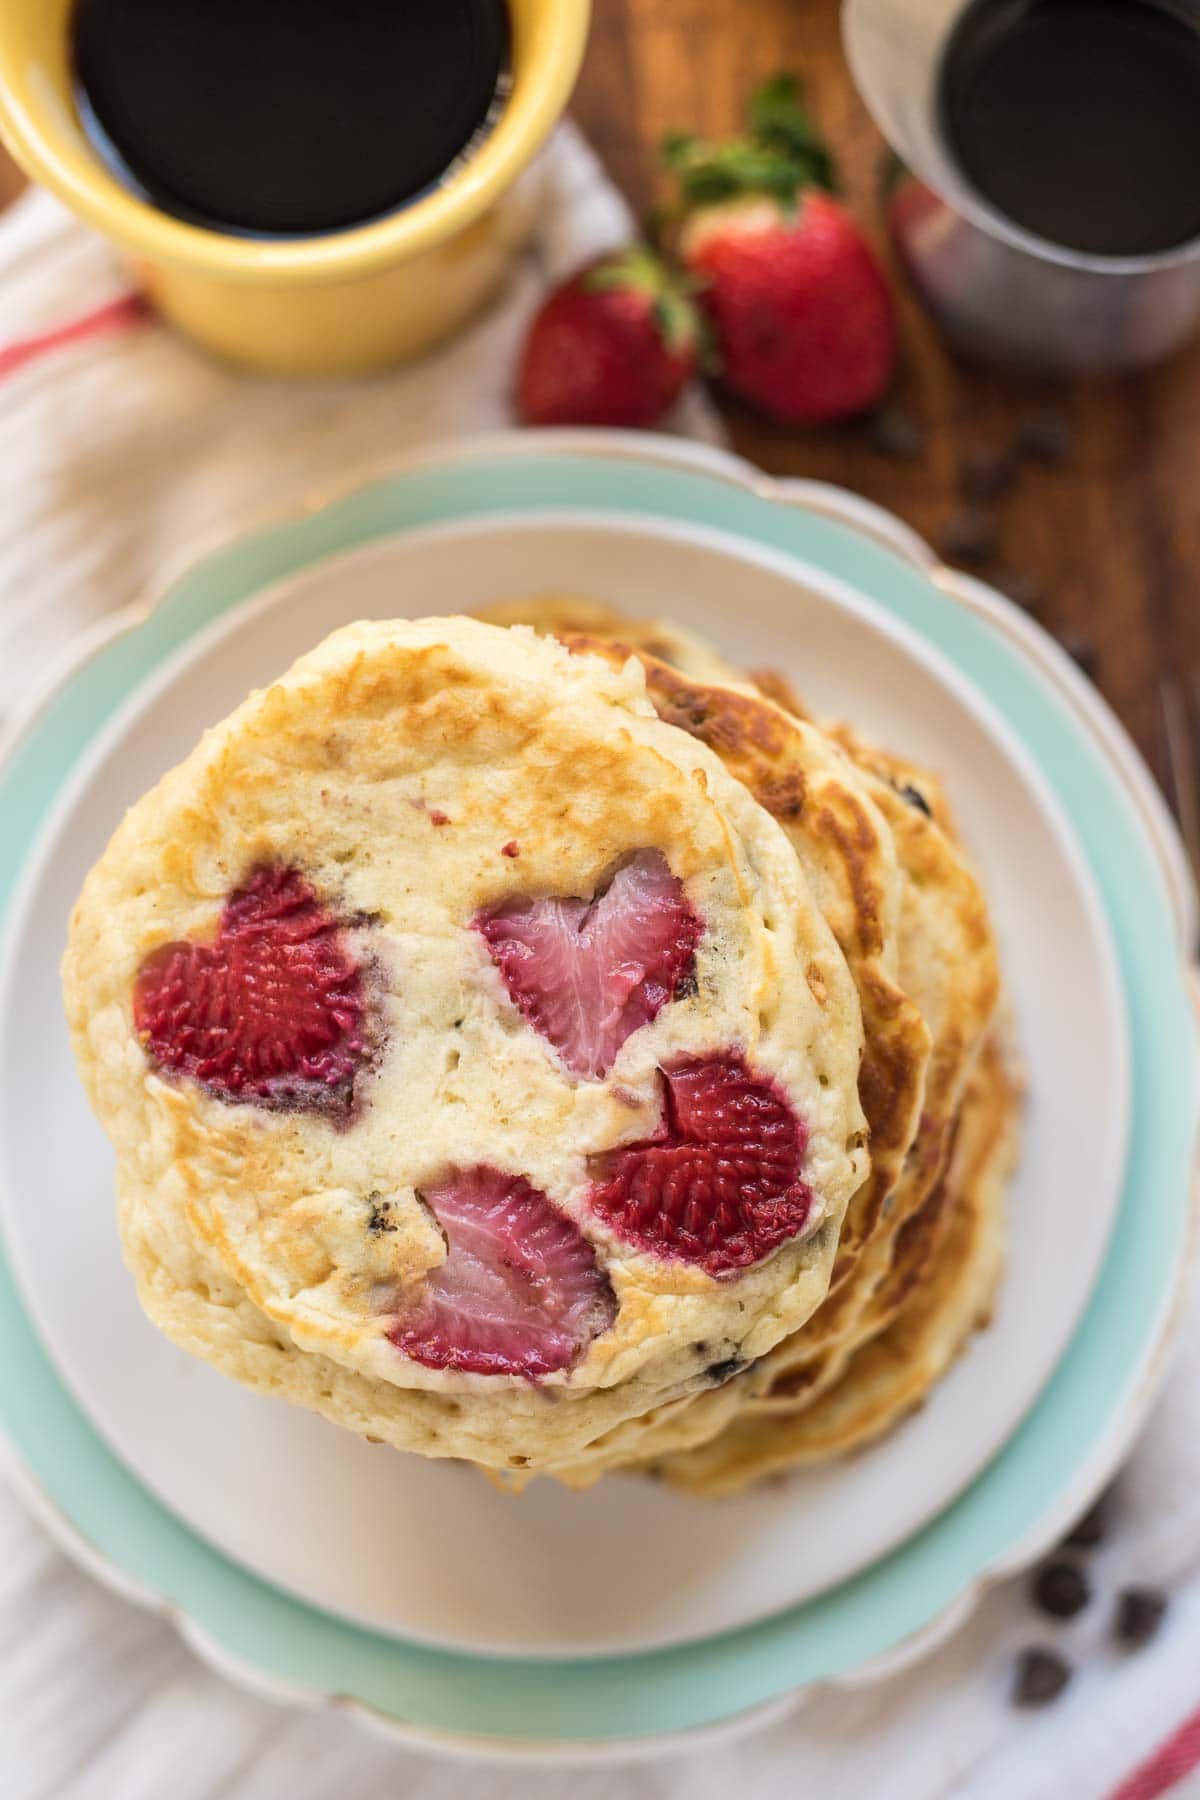 Make these Strawberry Chocolate Chip Pancakes for the one you love!